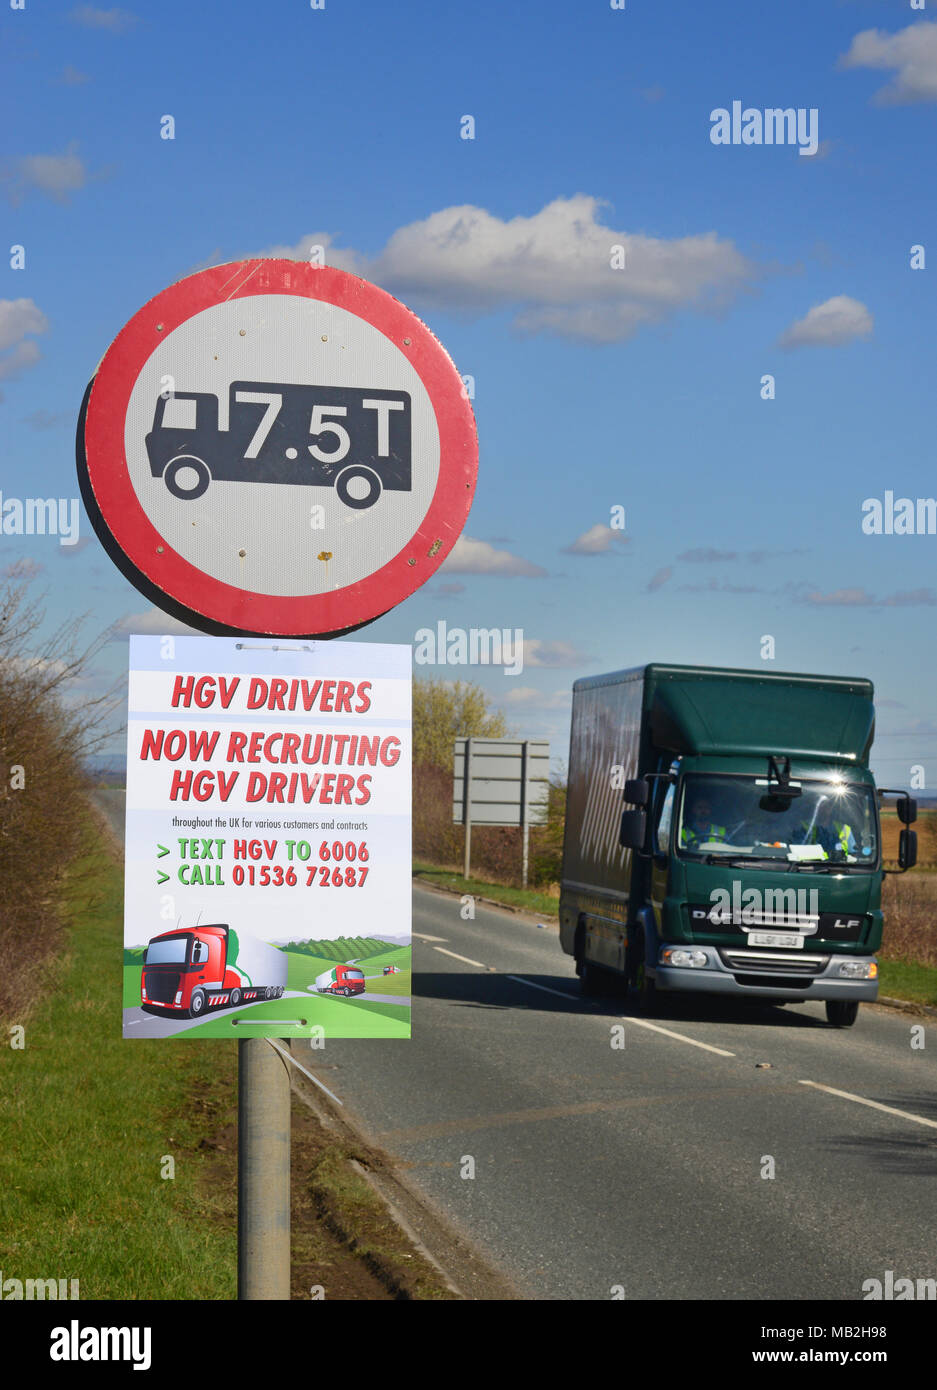 lorry driver passing roadside recruitment advert for hgv lorry drivers leeds united kingdom Stock Photo